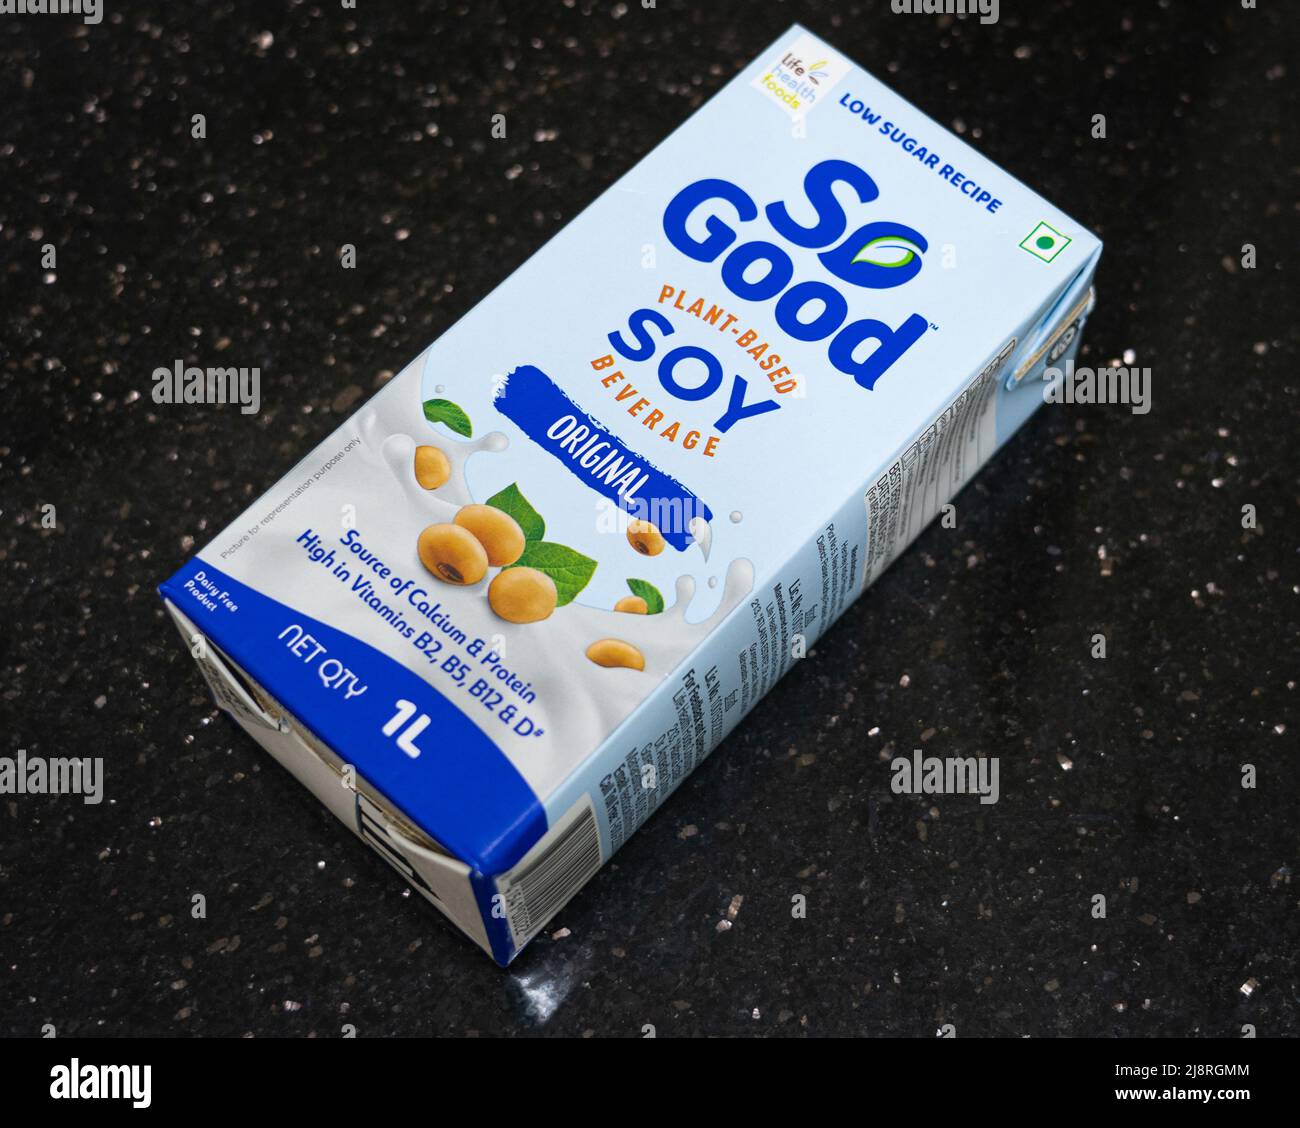 A carton of So Good Soy Milk on a black granite background. Stock Photo